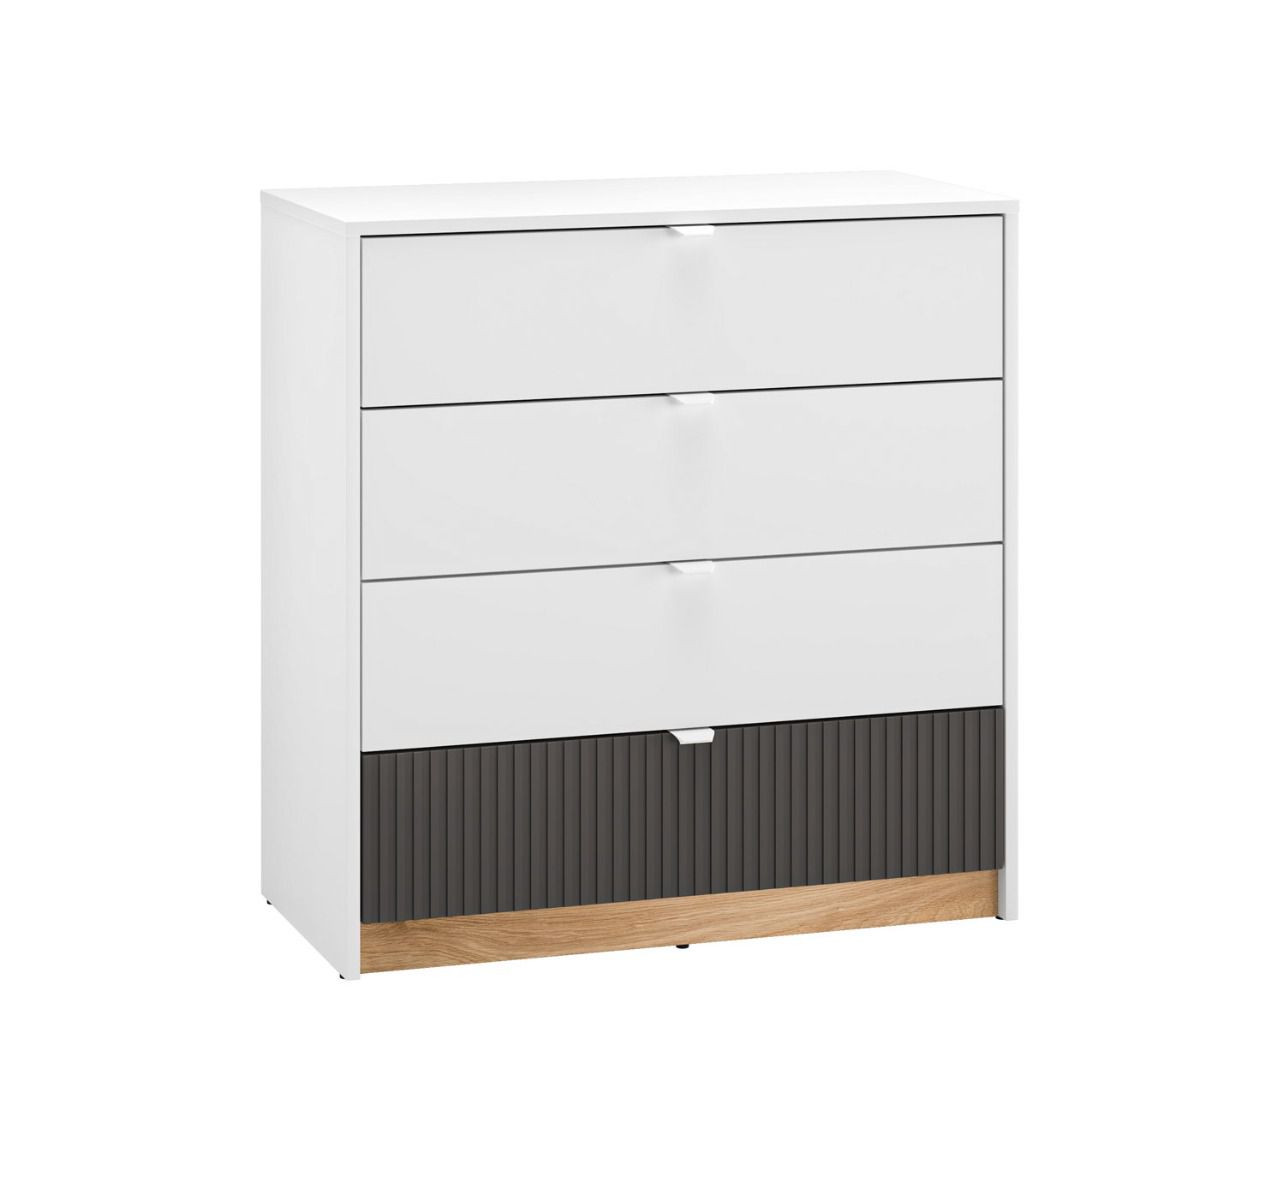 Simple chest of drawers with four drawers Mackinac 07, ABS edge protection, color: white / oak / graphite matt, handles: Metal, dimensions: 86 x 82 x 40 cm, easy to combine with other furniture, with soft-close system